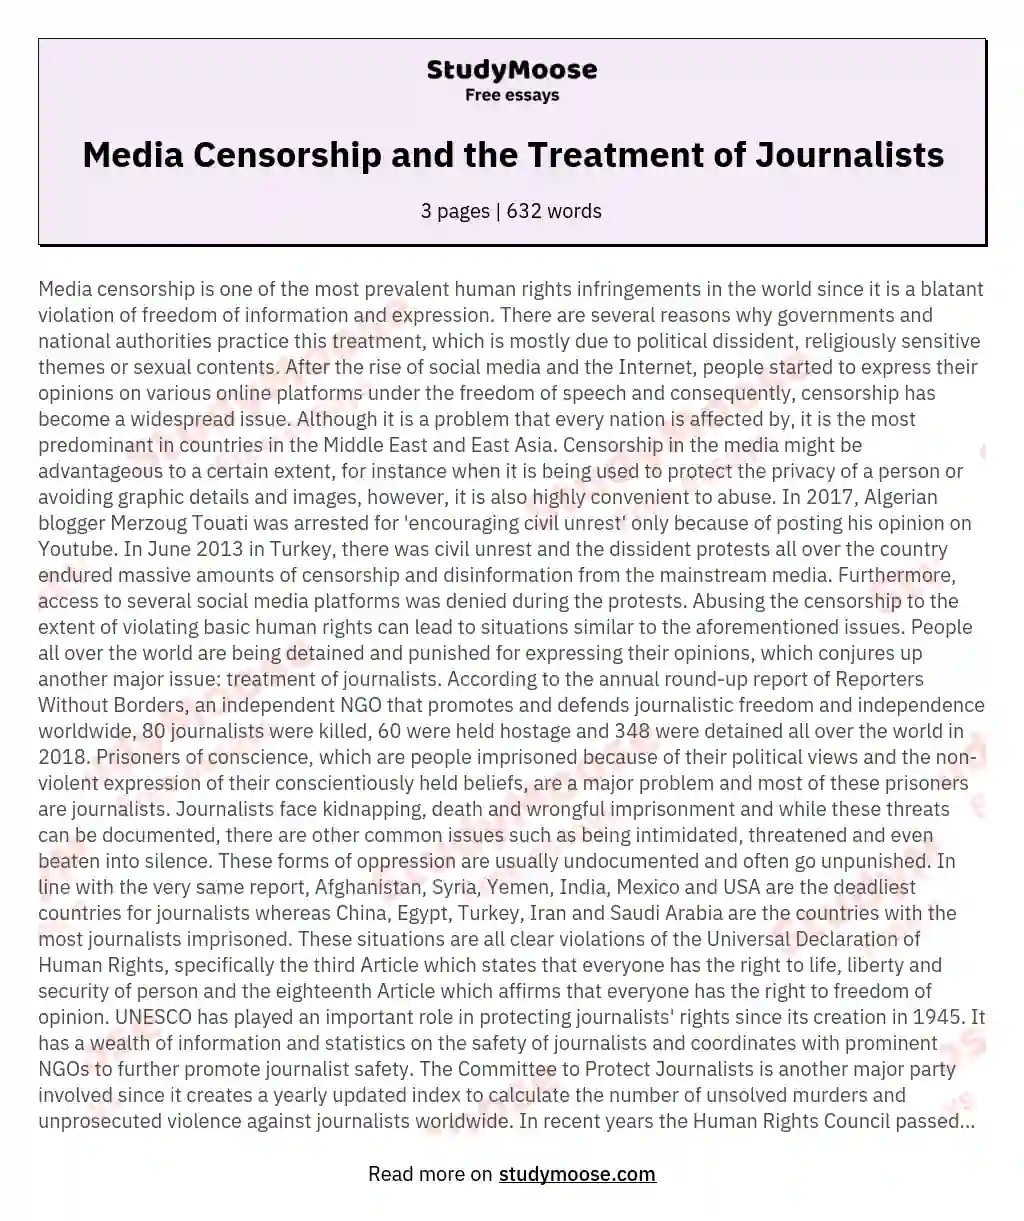 Media Censorship and the Treatment of Journalists